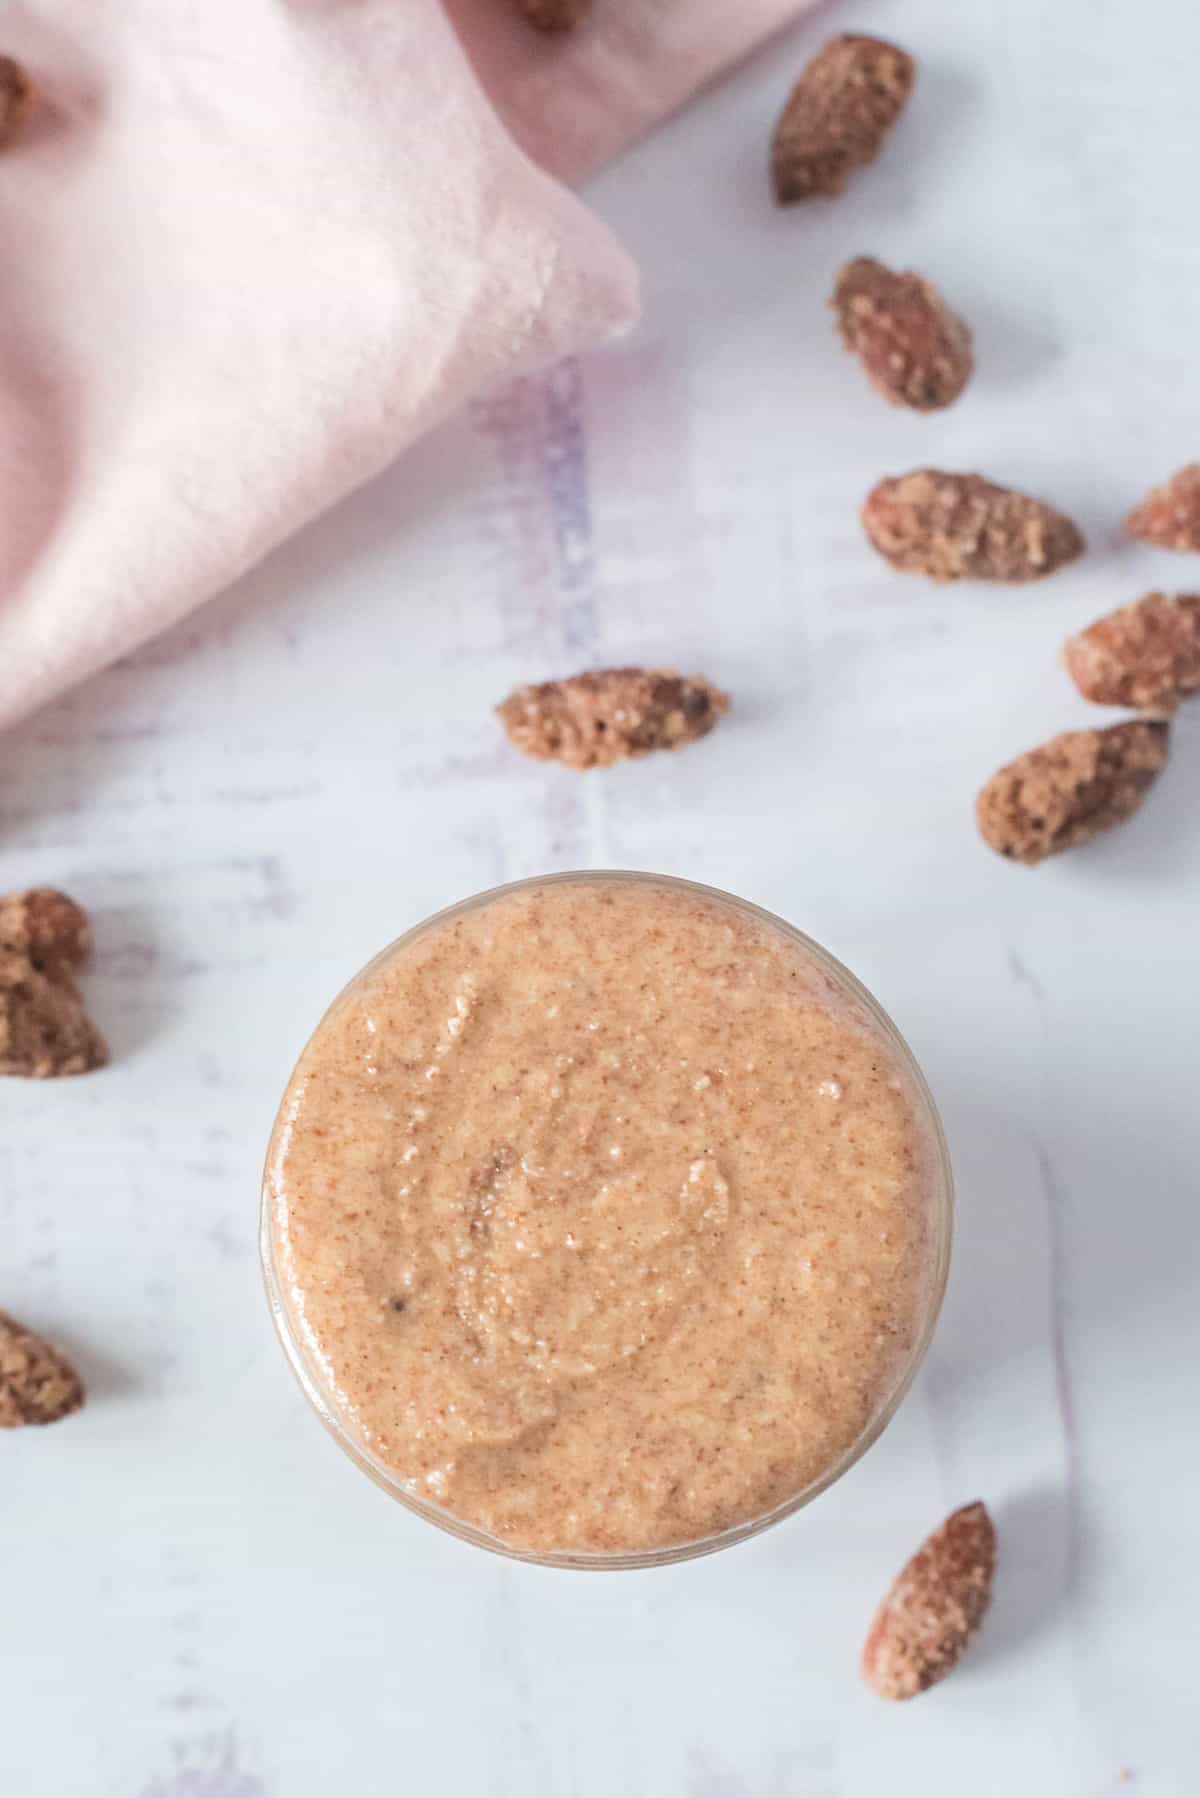 Overhead view of nut butter in a small jar.